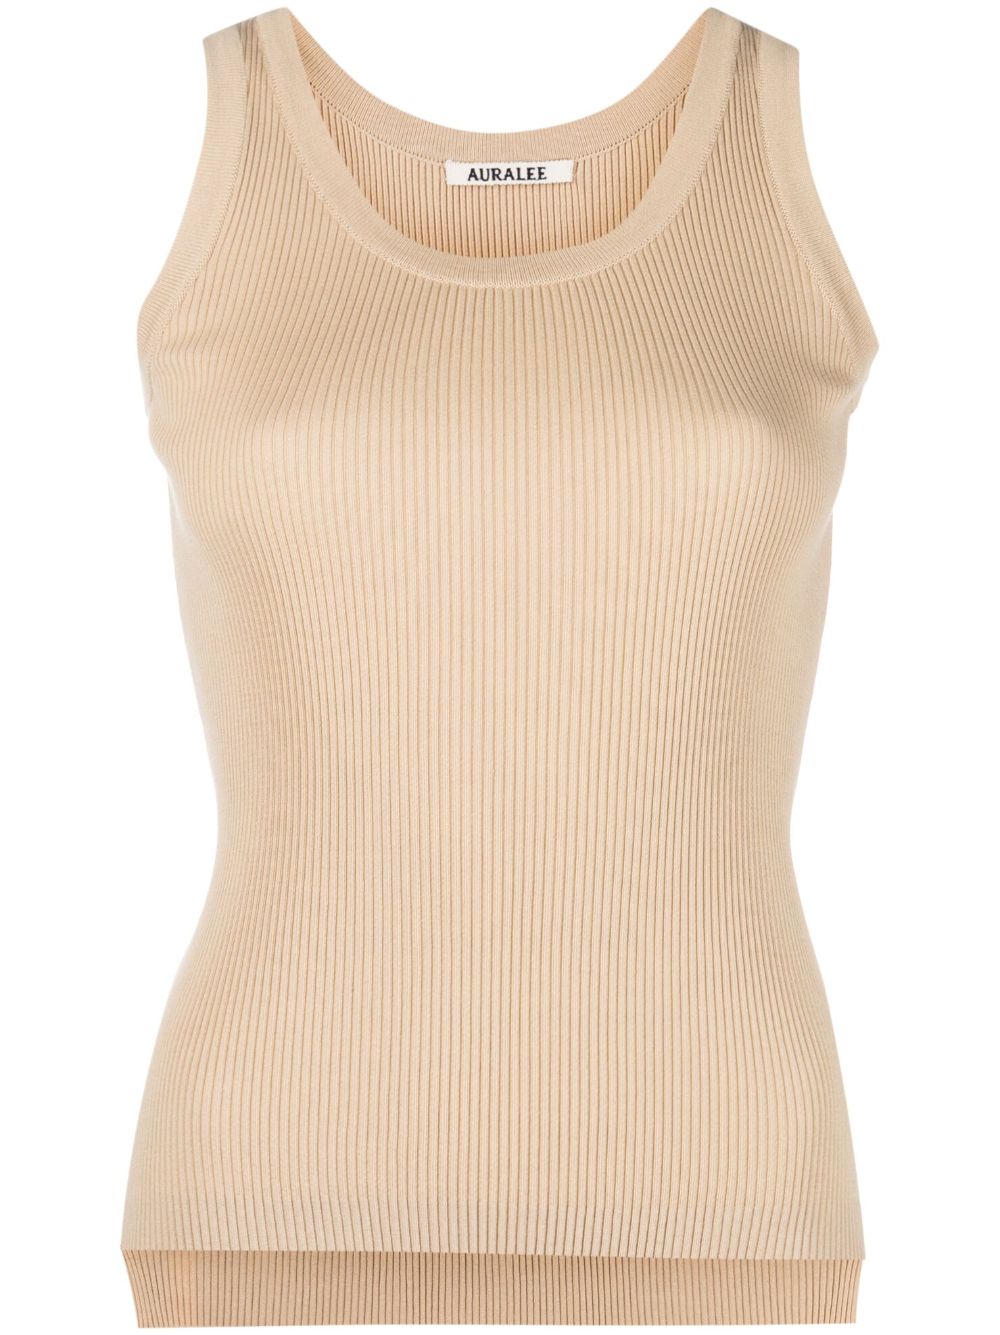 AURALEE RIBBED SLEEVELESS COTTON TOP